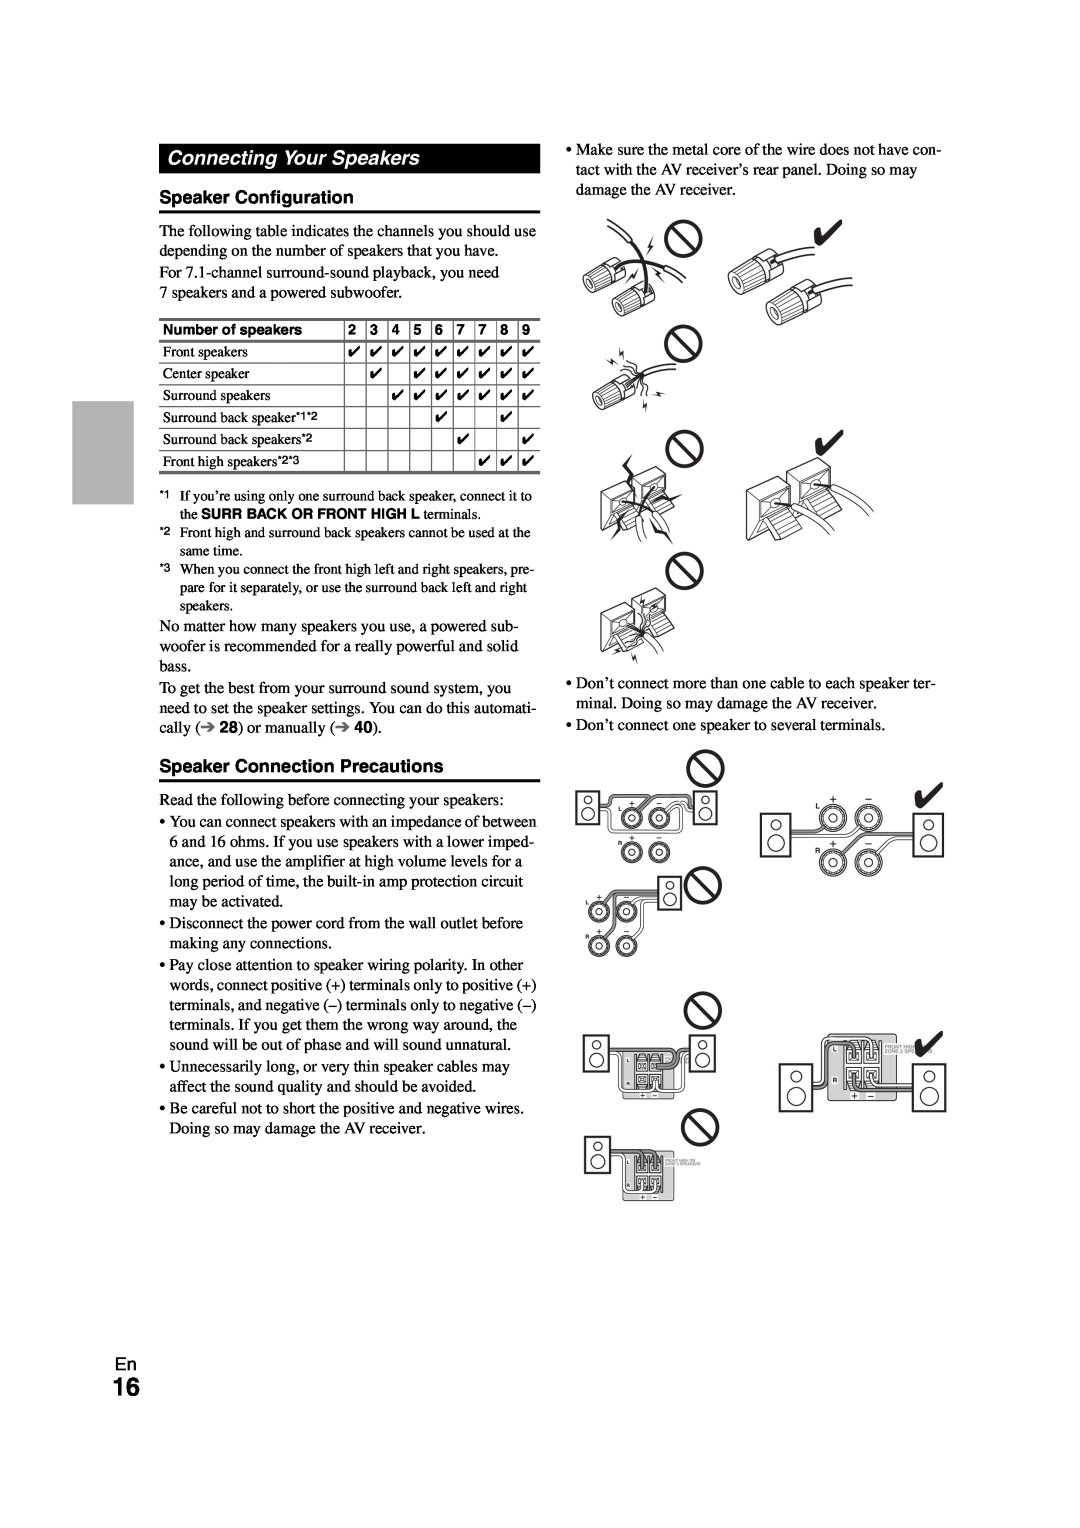 Onkyo HT-S7300 instruction manual Connecting Your Speakers, Speaker Configuration, Speaker Connection Precautions 